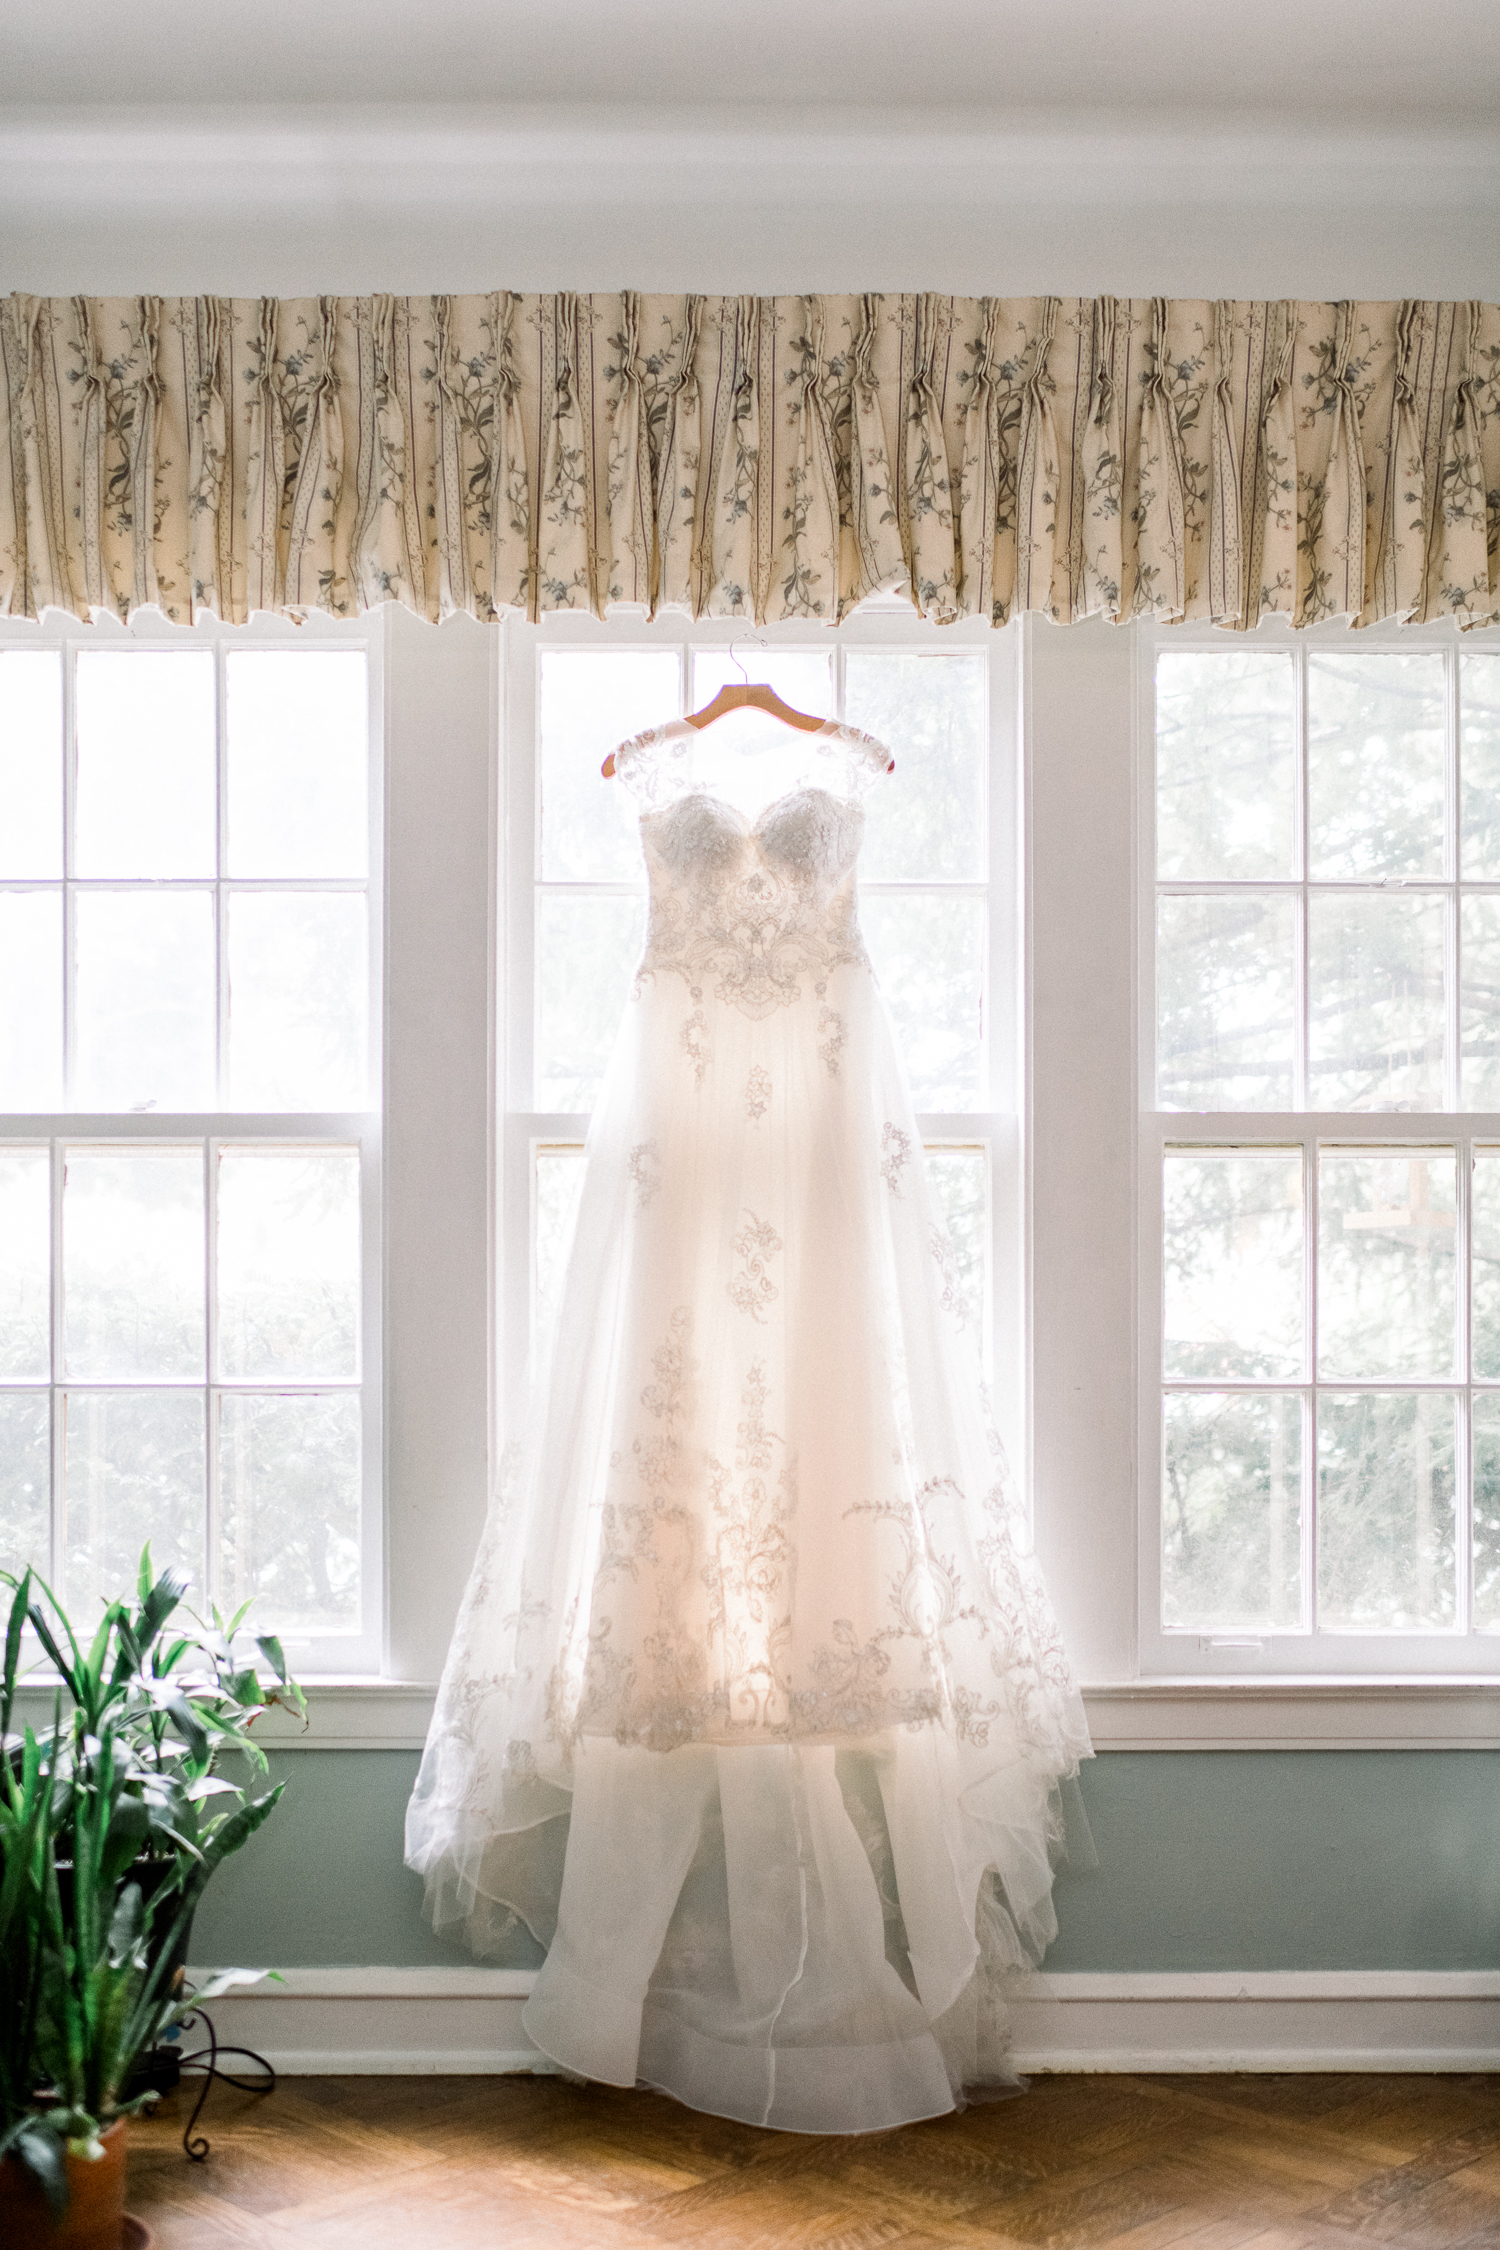 White lacy wedding dress hanging by the window